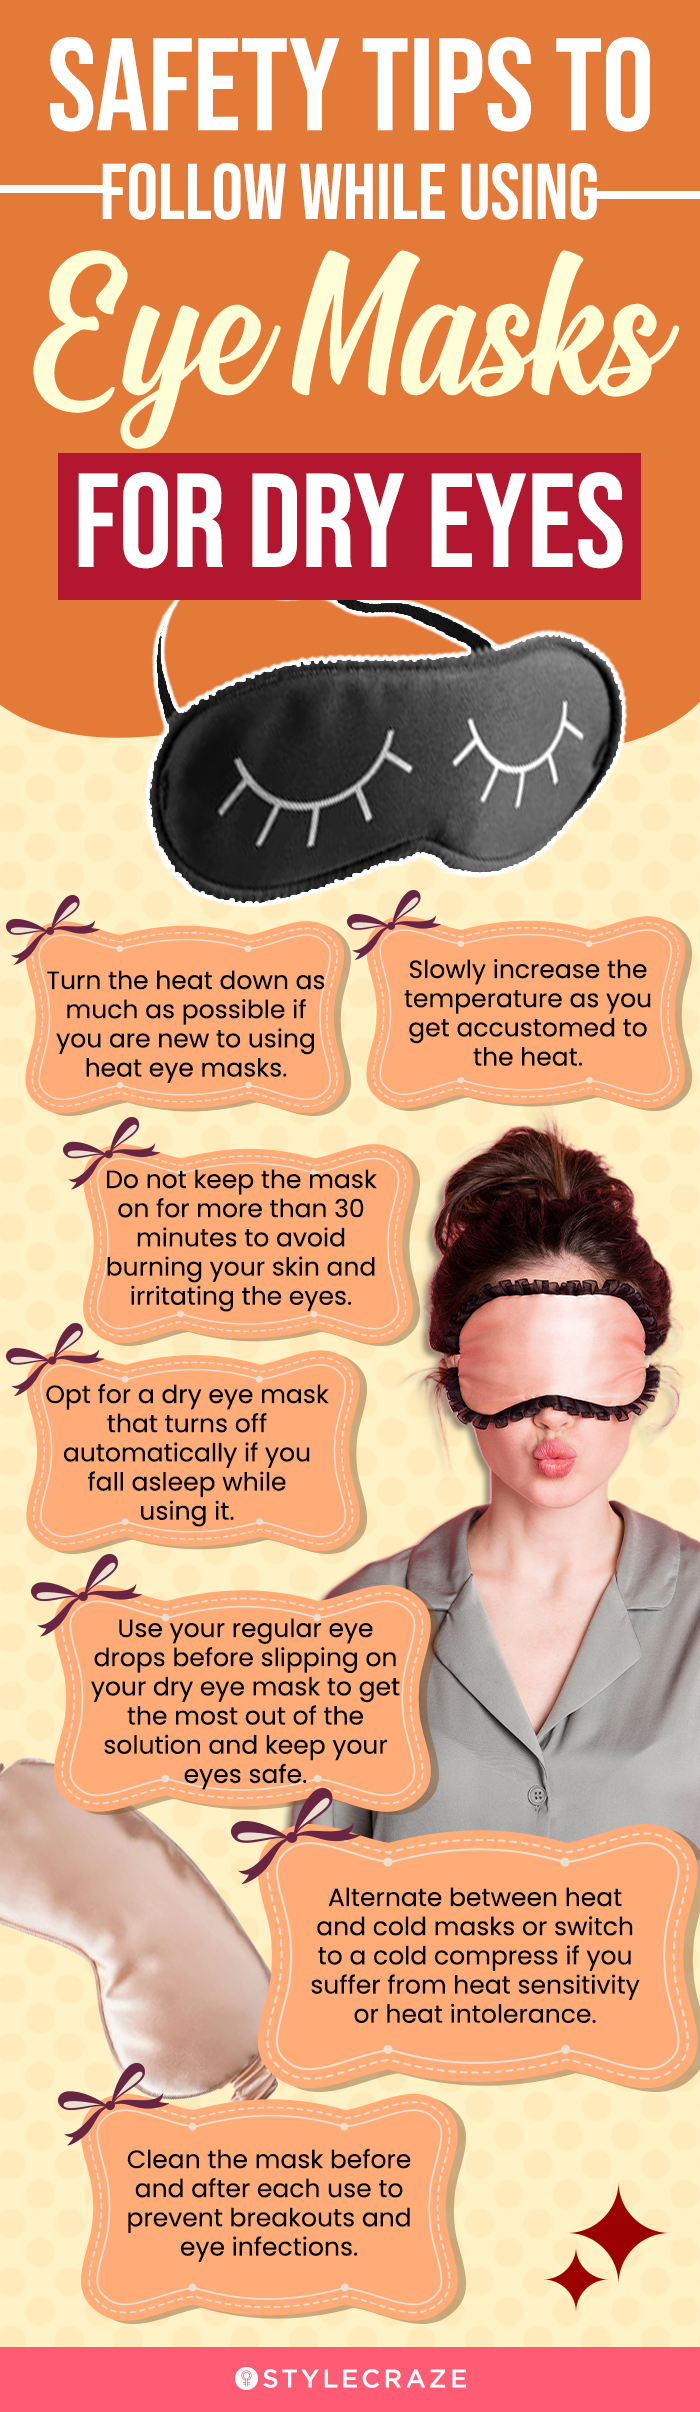 Safety Tips To Follow While Using Eye Masks for Dry Eyes (infographic)